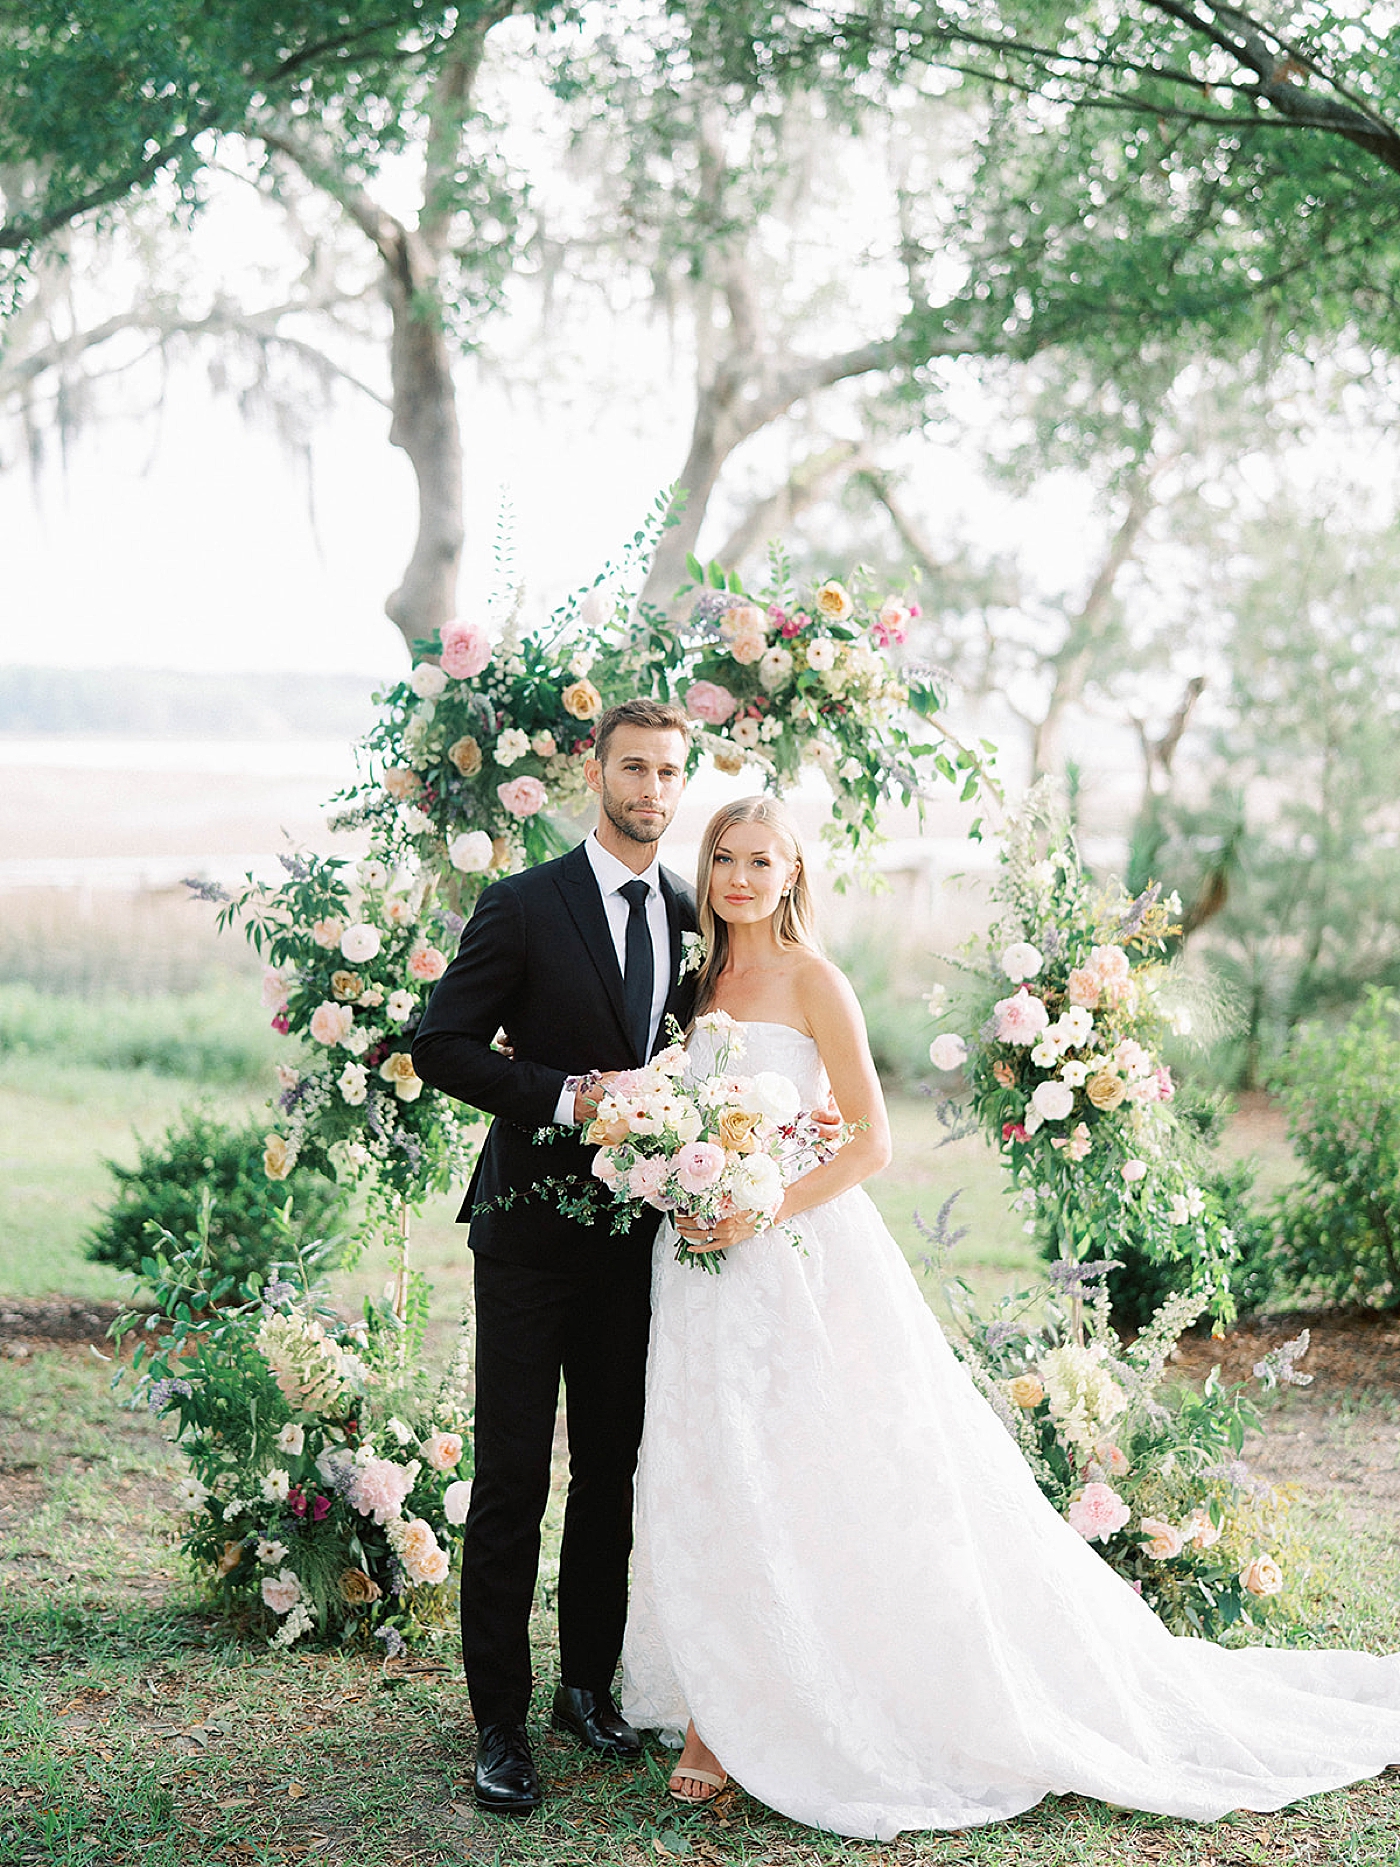 Bride and groom pose in front of their wedding arbor | Carters Event Co